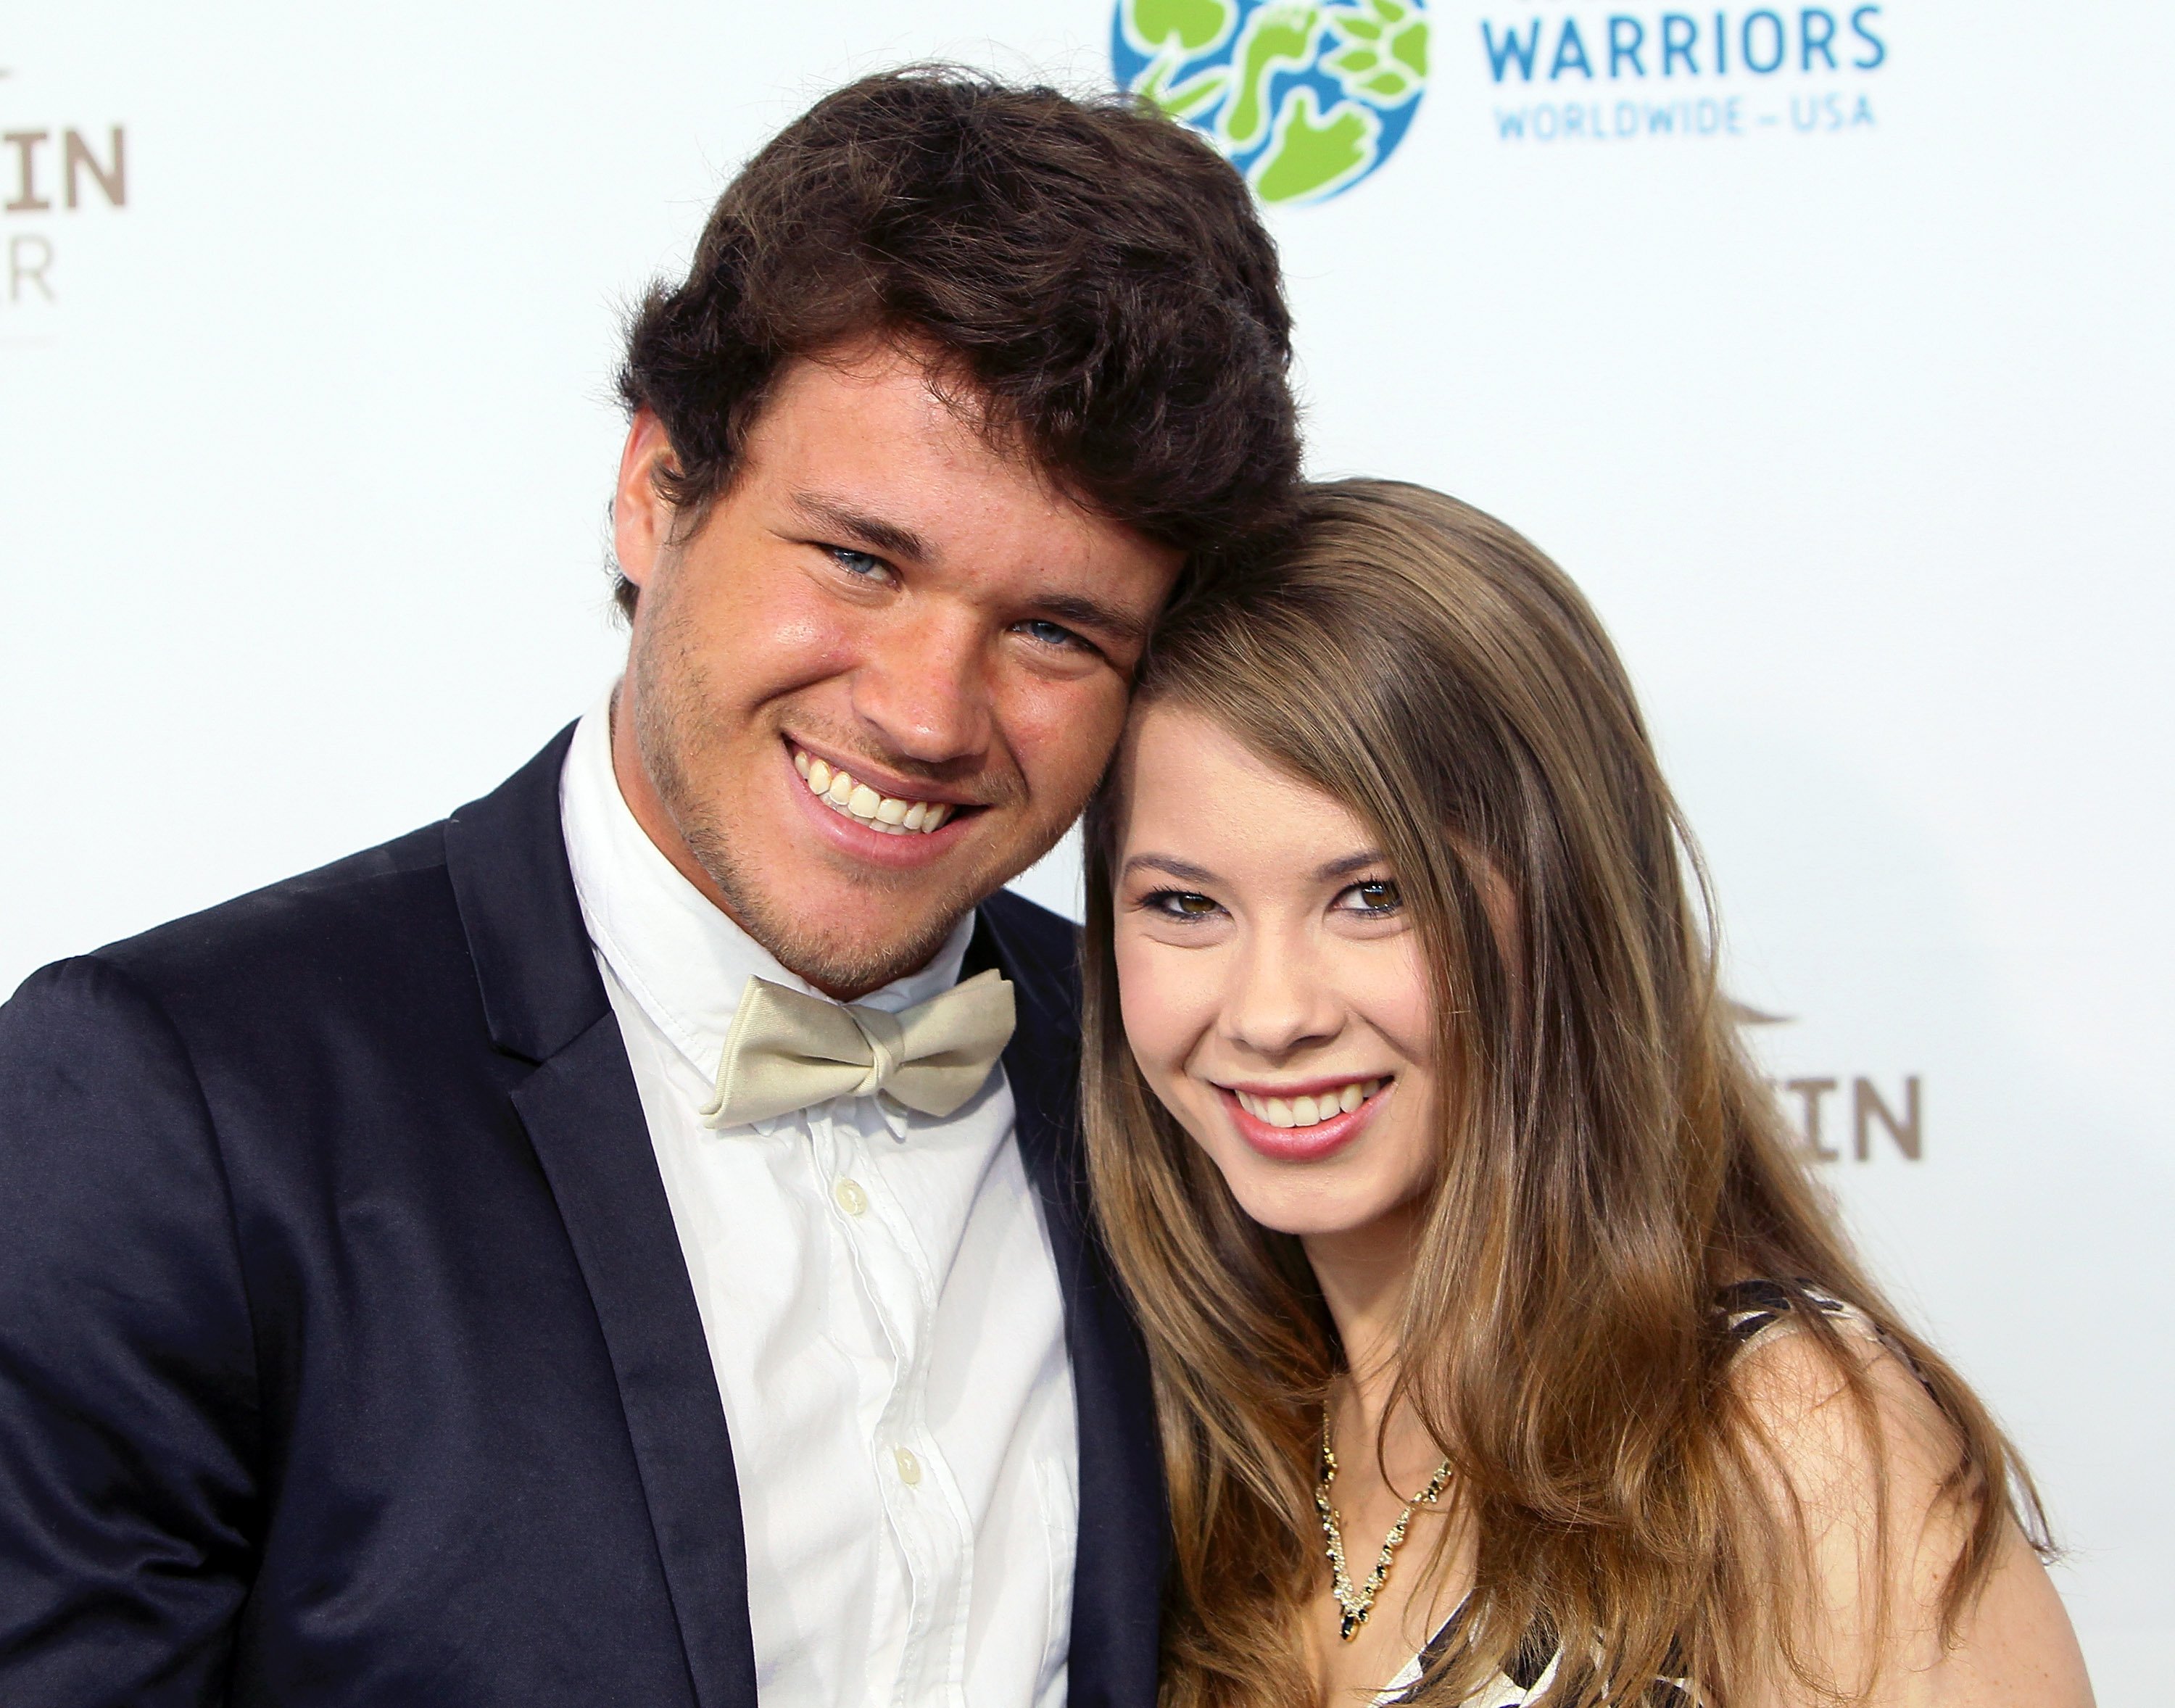 Chandler Powell and Bindi Irwin attend the Steve Irwin Gala Dinner at JW Marriott Los Angeles at L.A. LIVE on May 21, 2016 in Los Angeles, California | Photo: Getty Images